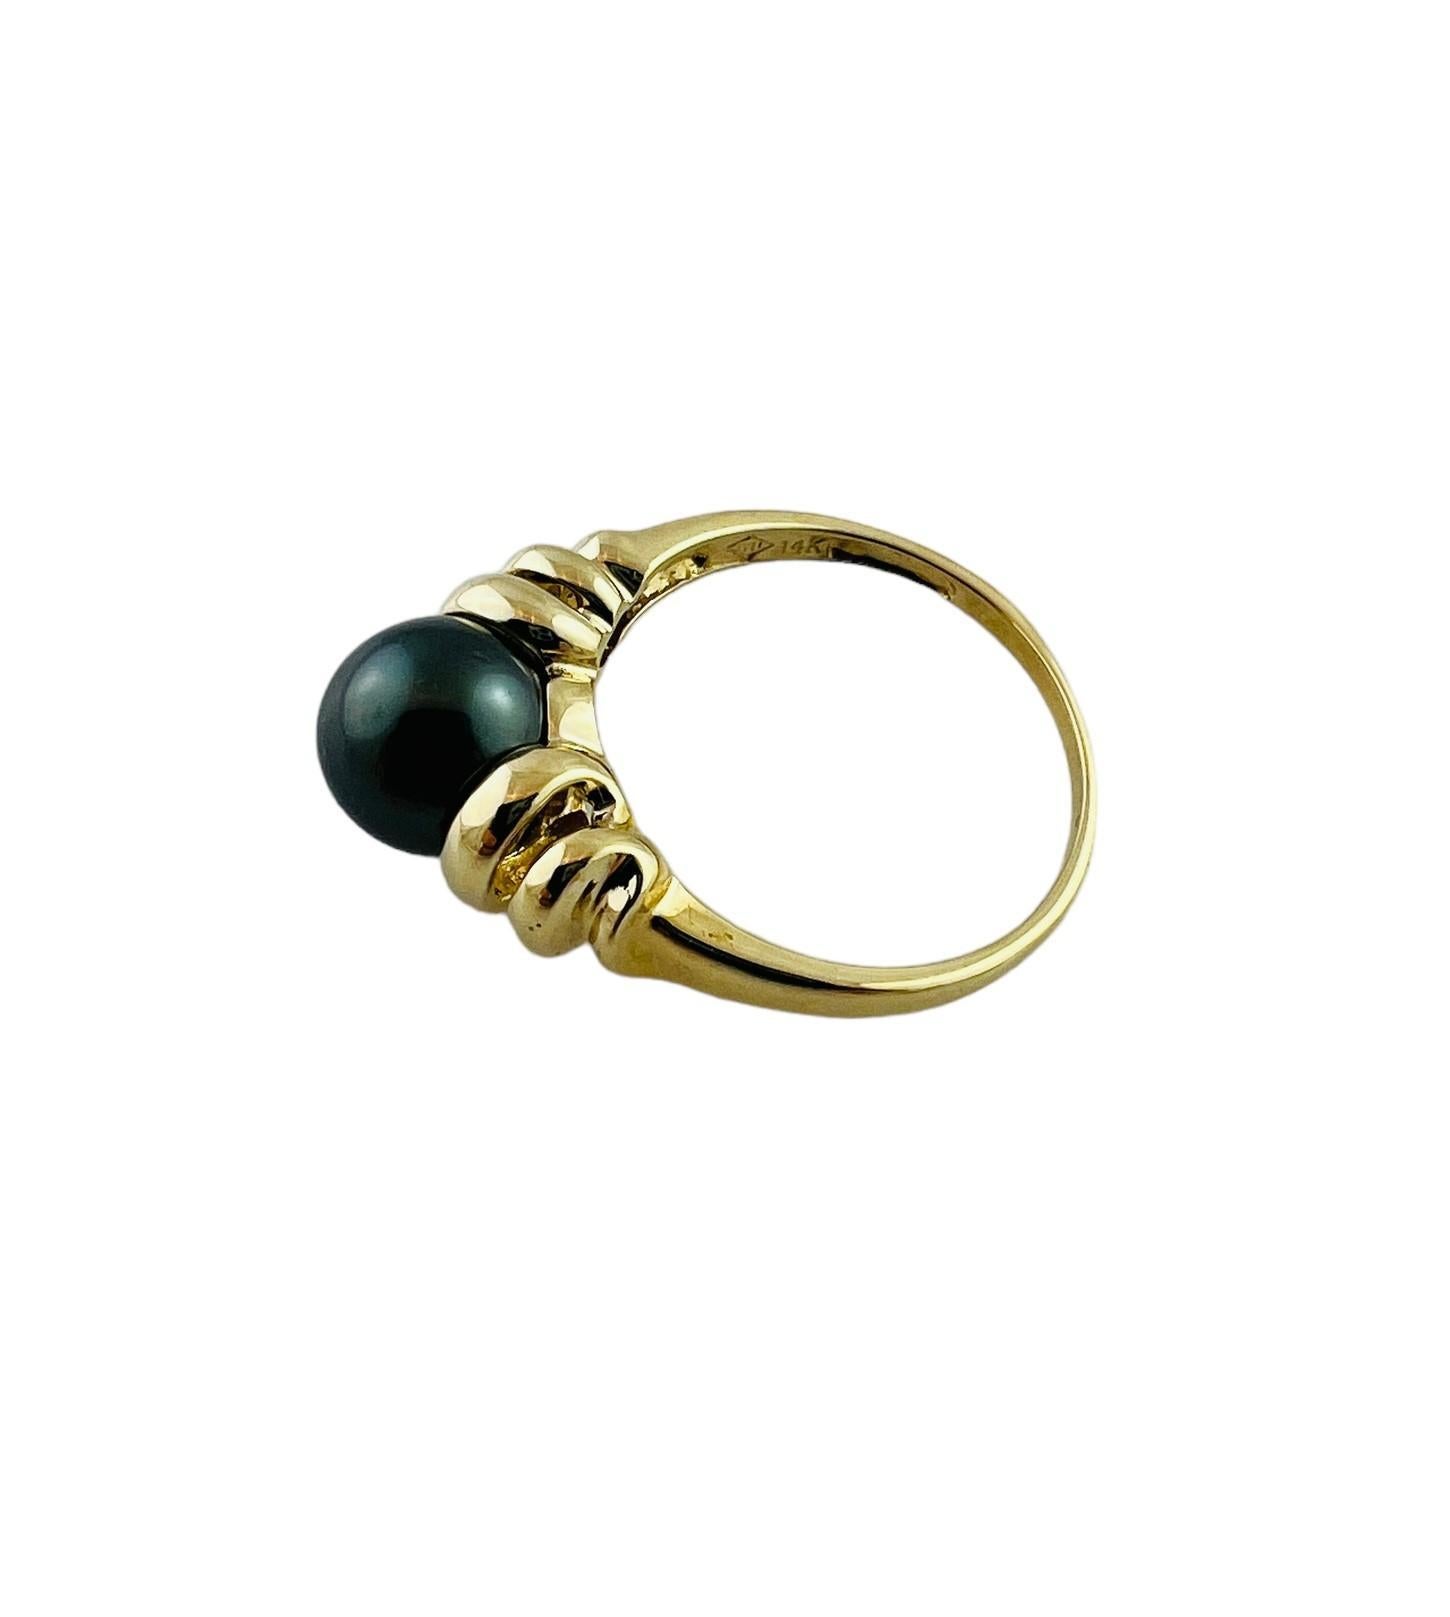 Round Cut 14K Yellow Gold Black Pearl Ring Size 7.25 #15671